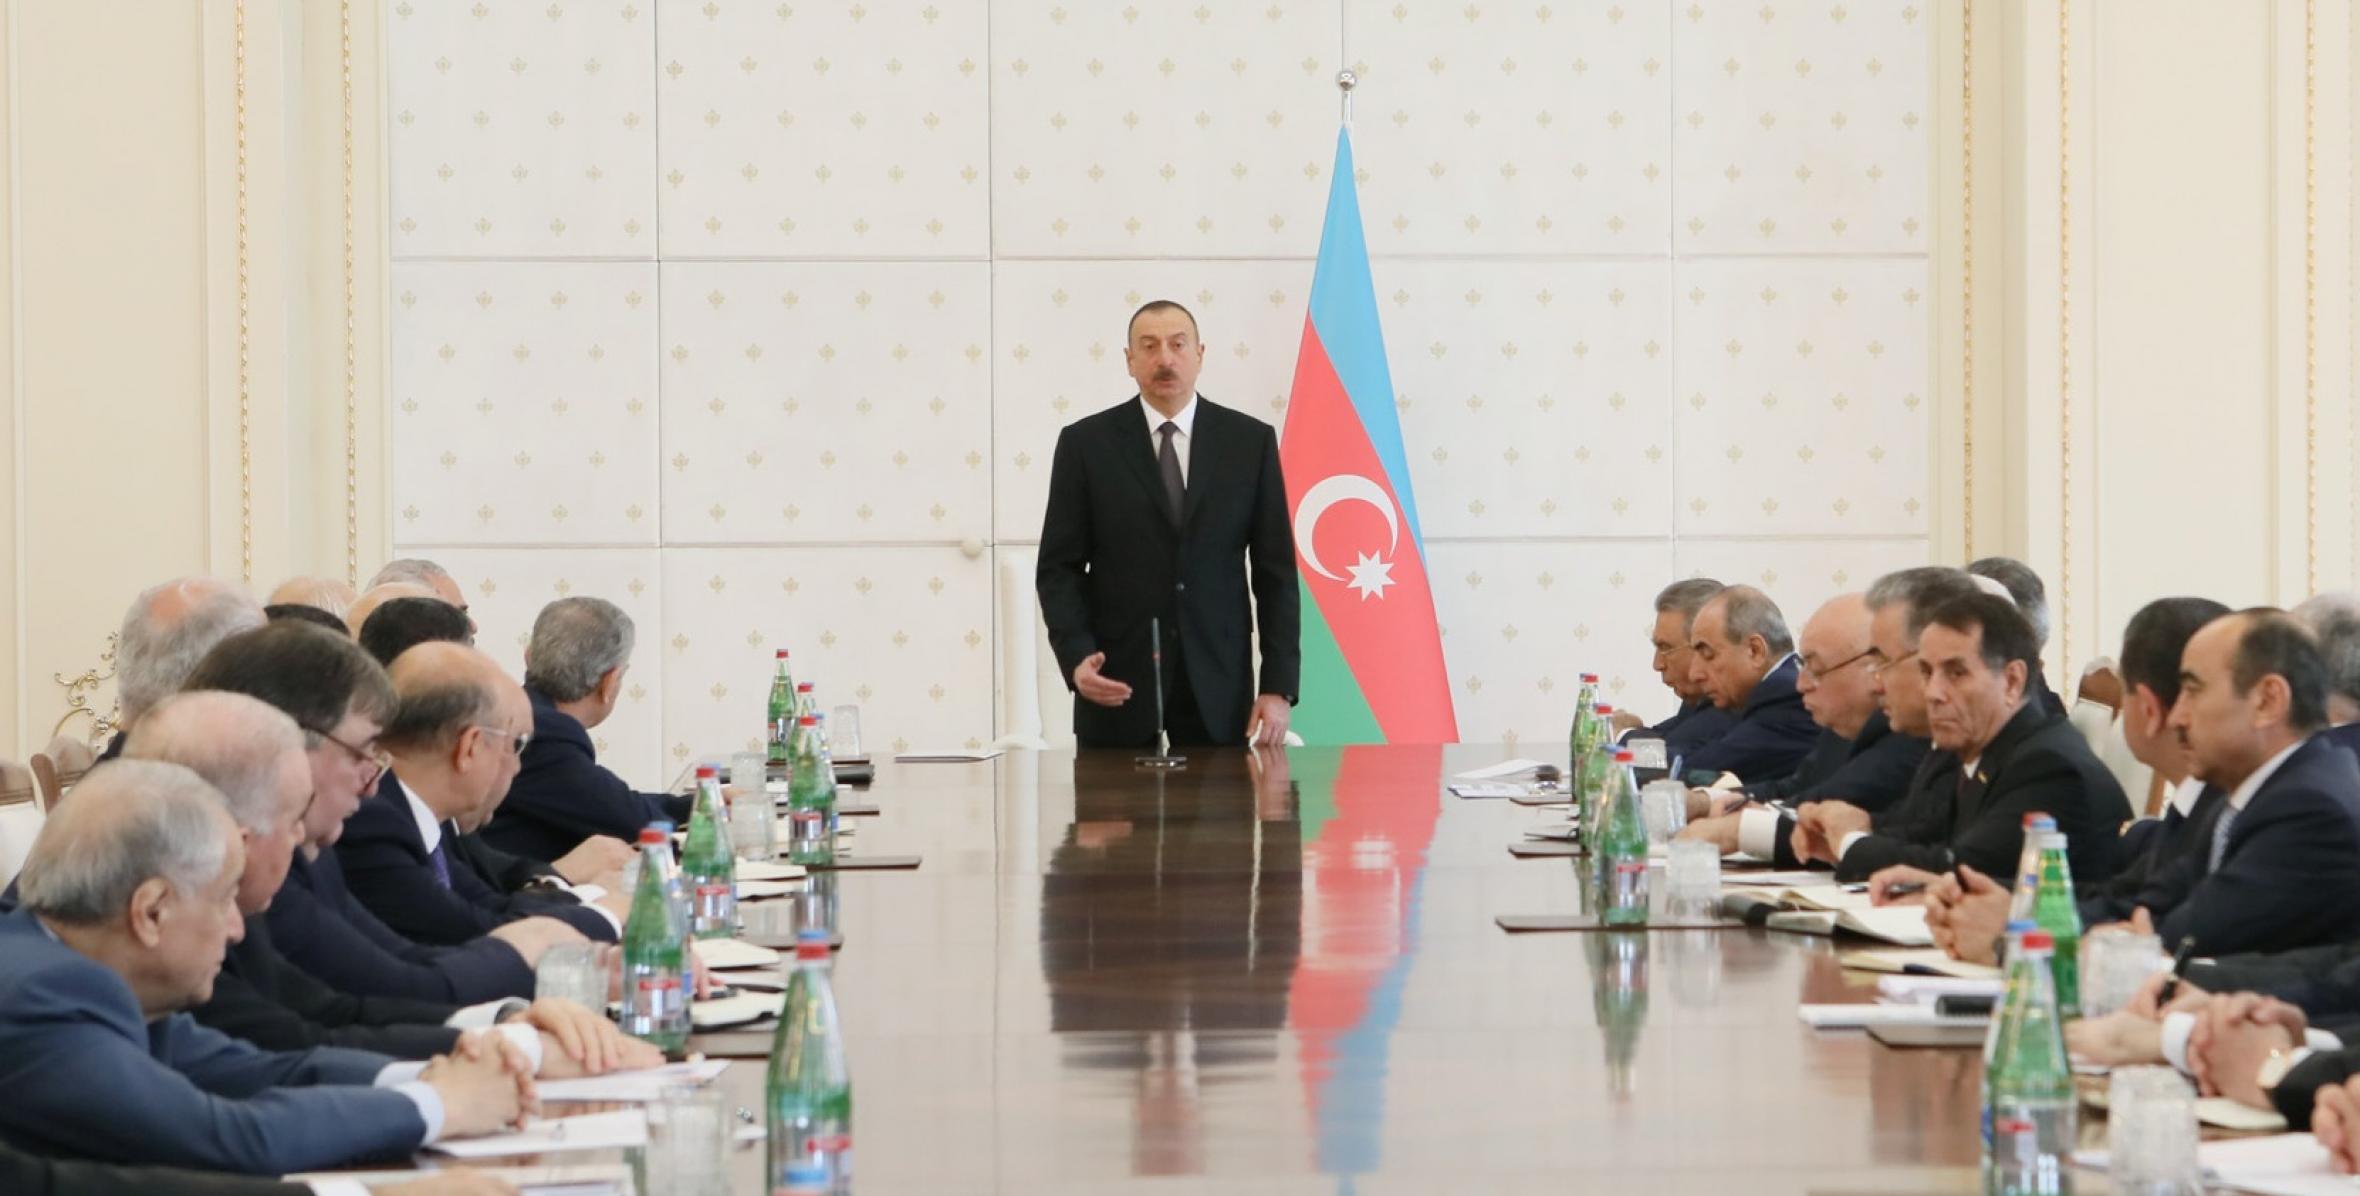 Opening speech by Ilham Aliyev at the meeting of Cabinet meeting on results of first quarter of 2017 and future tasks